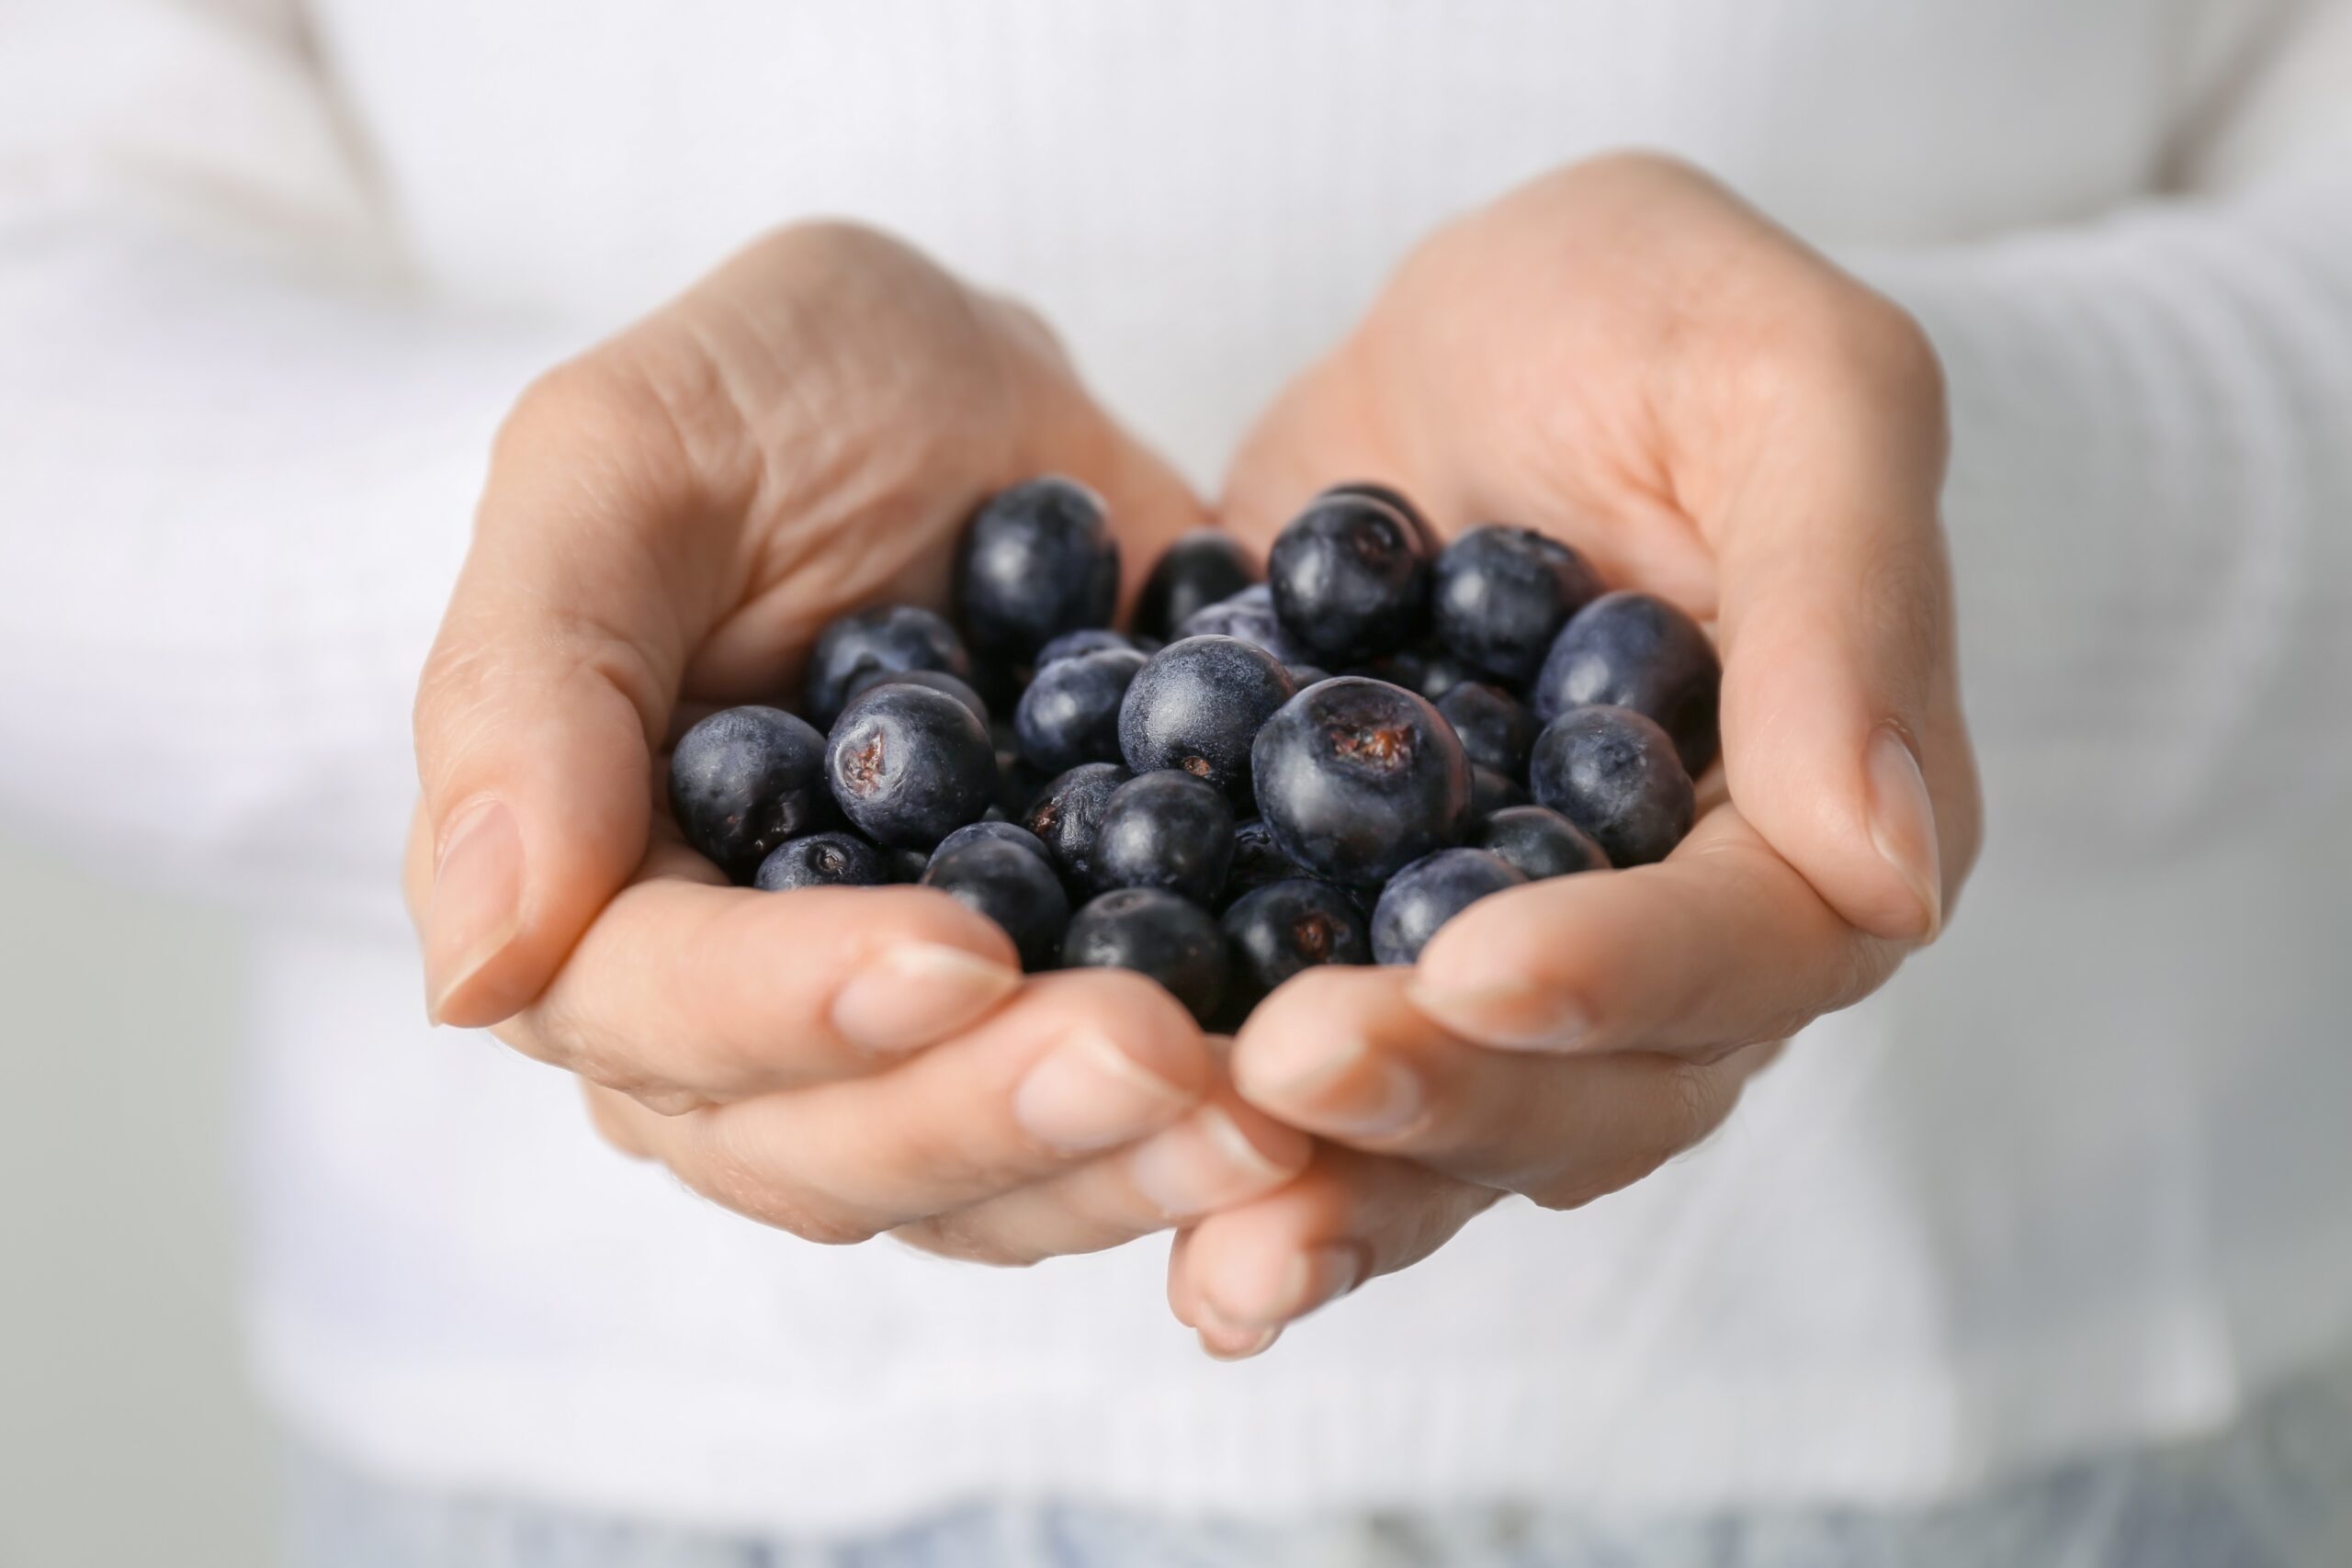 What are the benefits of acai berries